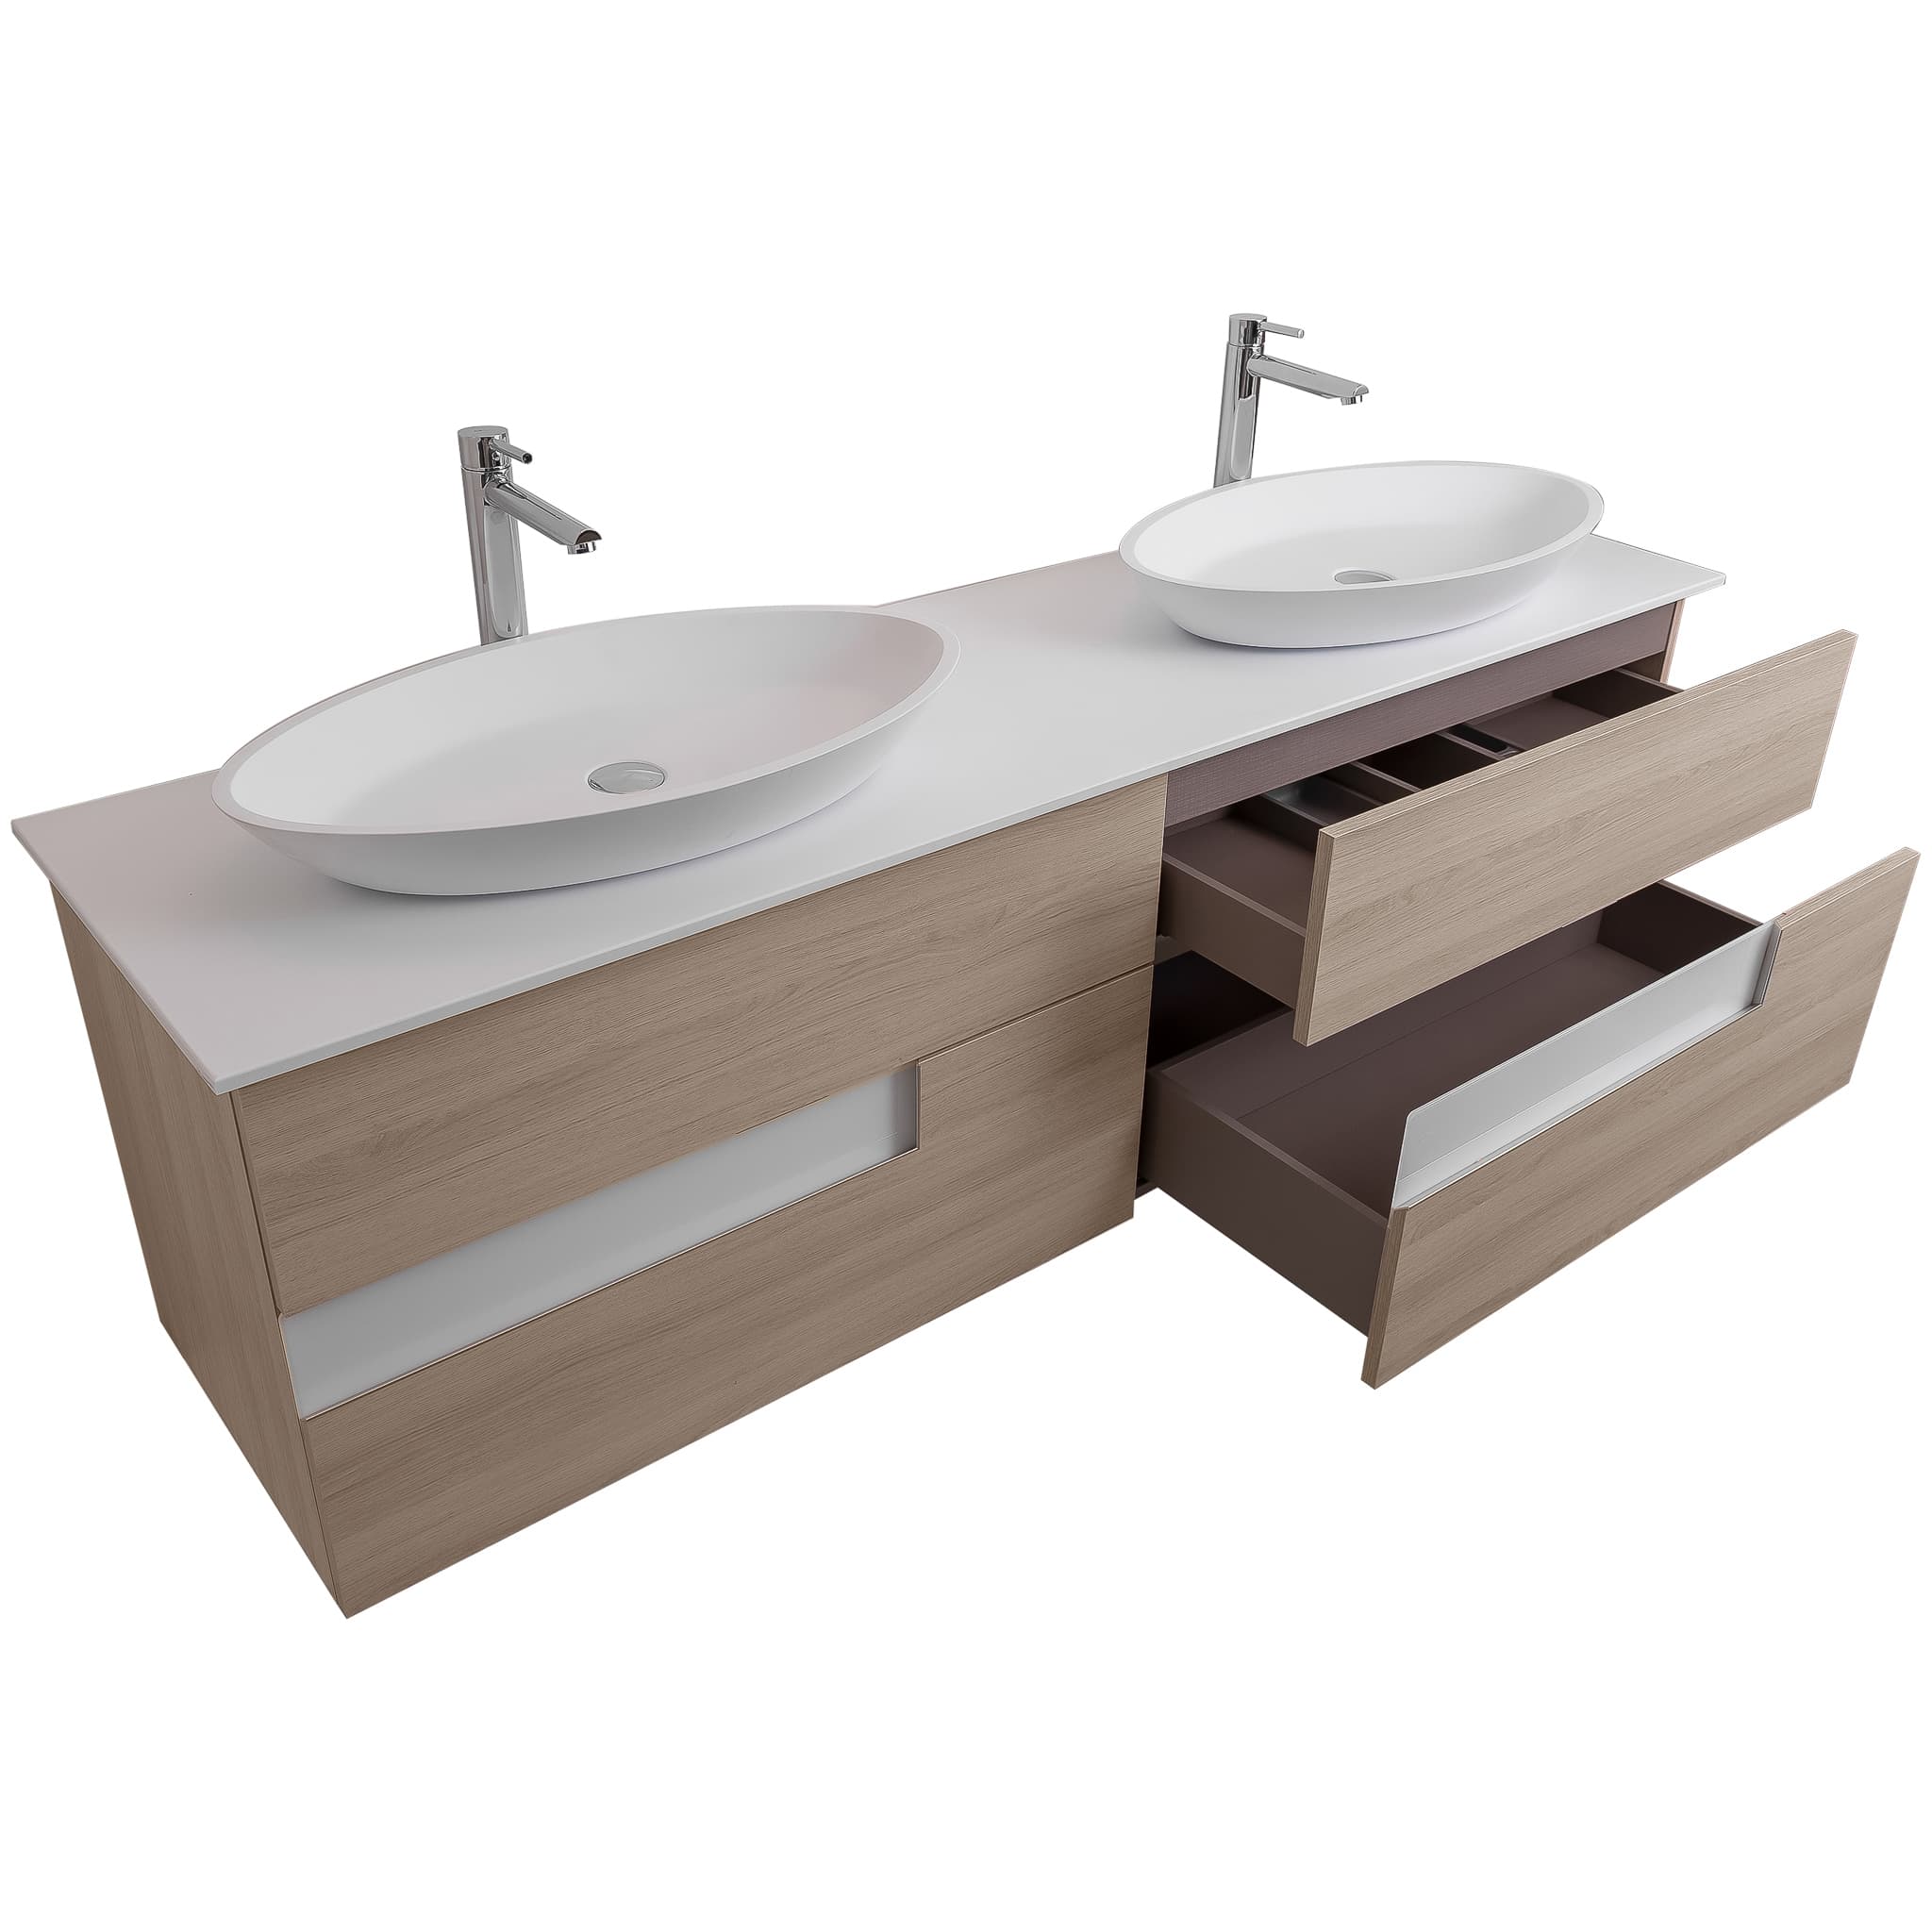 Vision 63 Natural Light Wood Cabinet, Solid Surface Flat White Counter And Two Oval Solid Surface White Basin 1305, Wall Mounted Modern Vanity Set